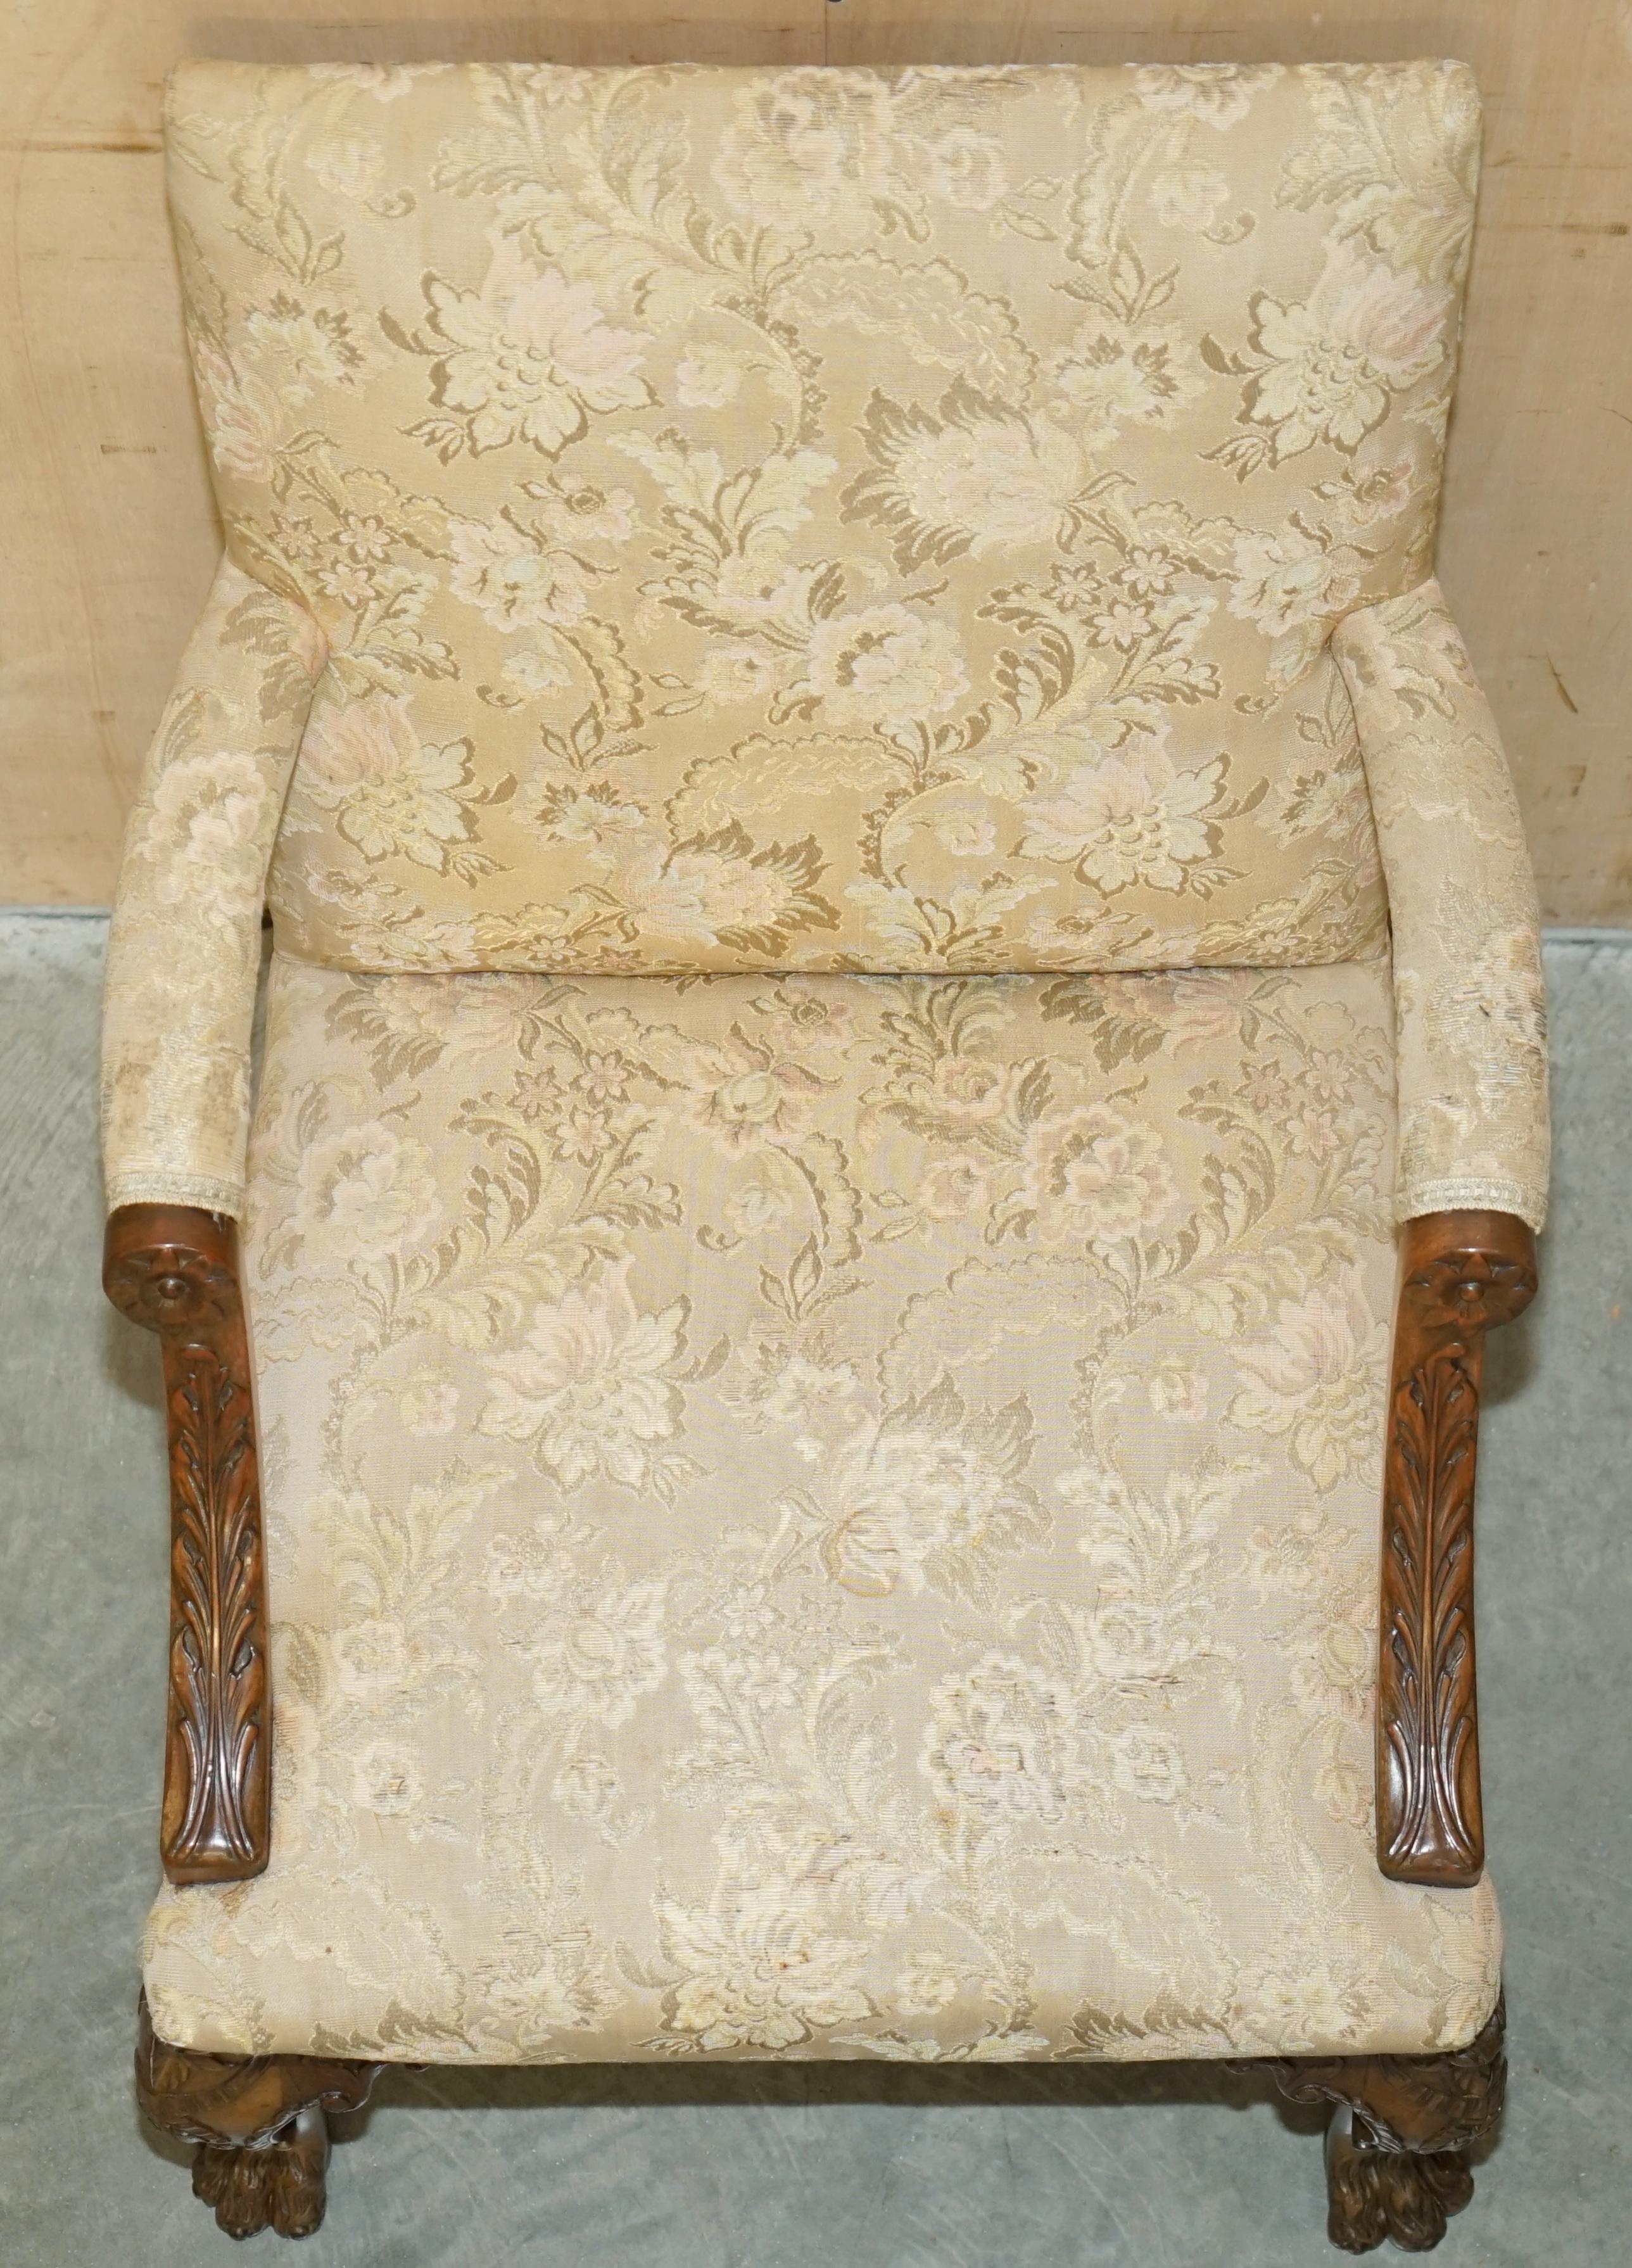 ANTIQUE CIRCA 1880 IRISH GEORGE III STYLE HEAViLY CARVED GAINSBOROUGH ARMCHAIR For Sale 7